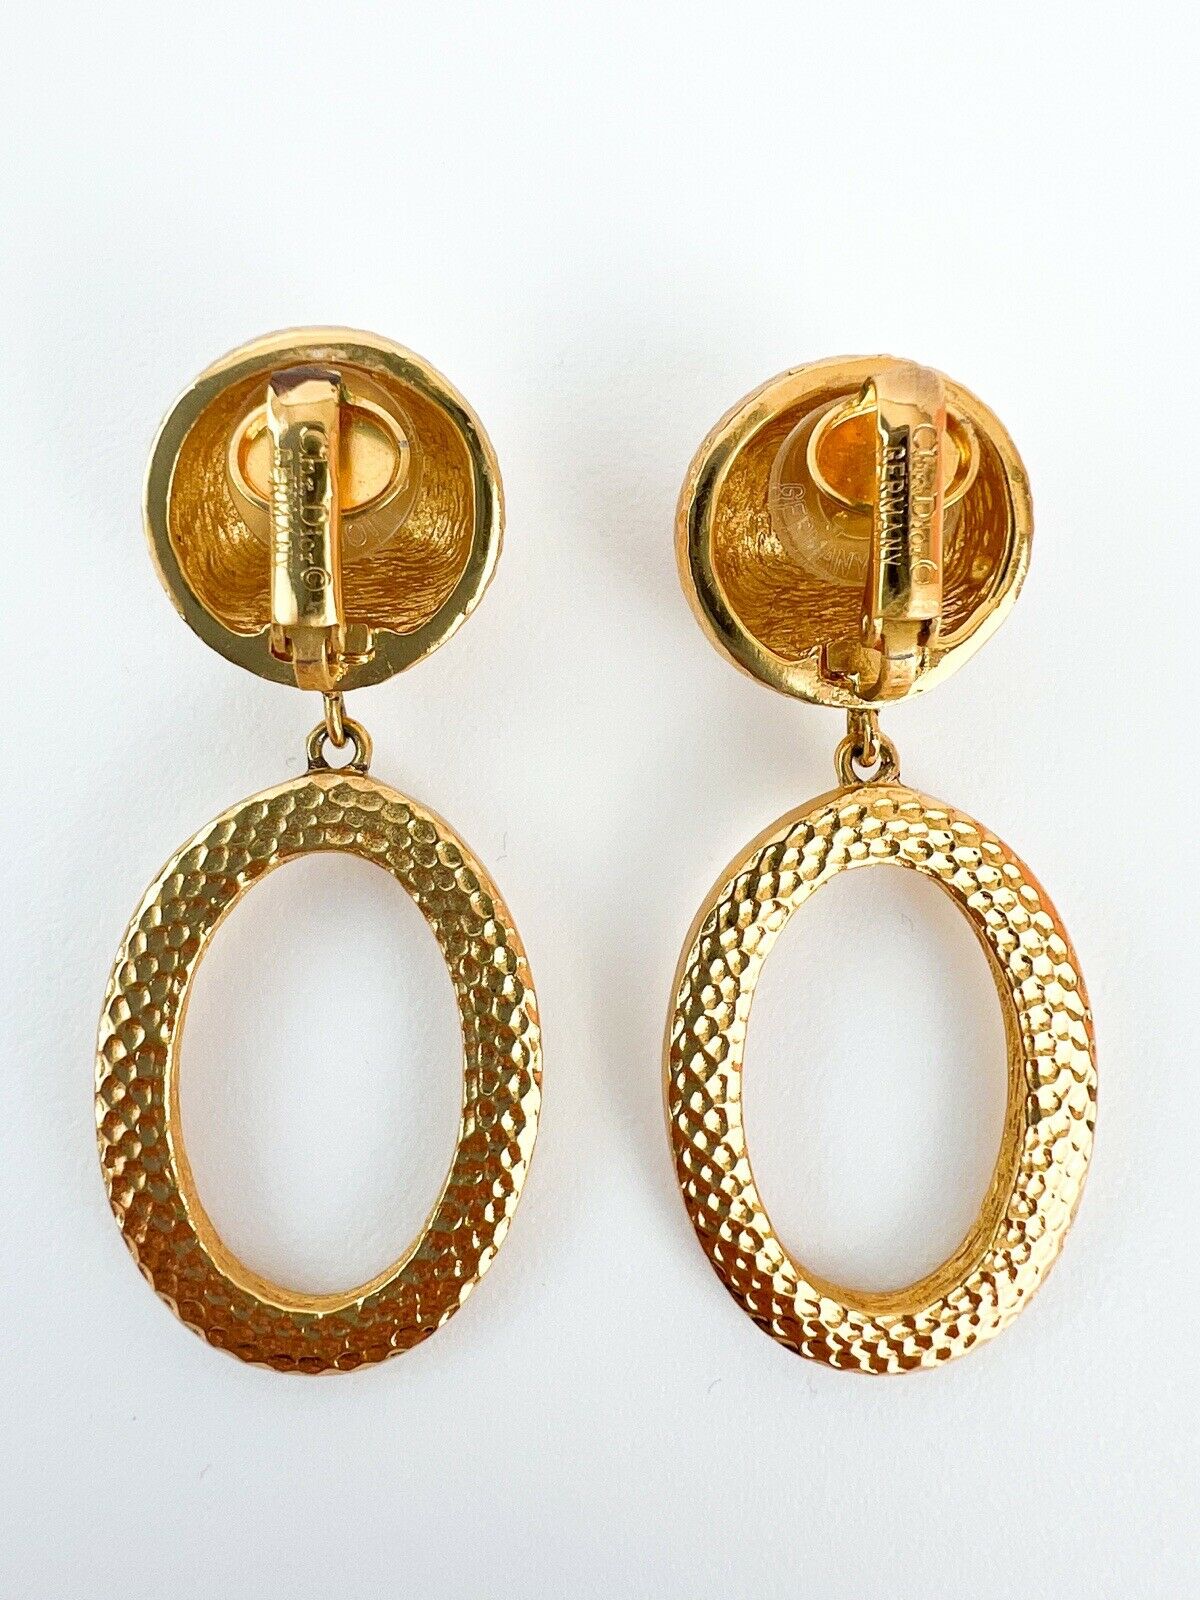 【SOLD OUT】Christian Dior Germany Vintage Clip on Hoop Earrings Dangle Drop Gold Tone